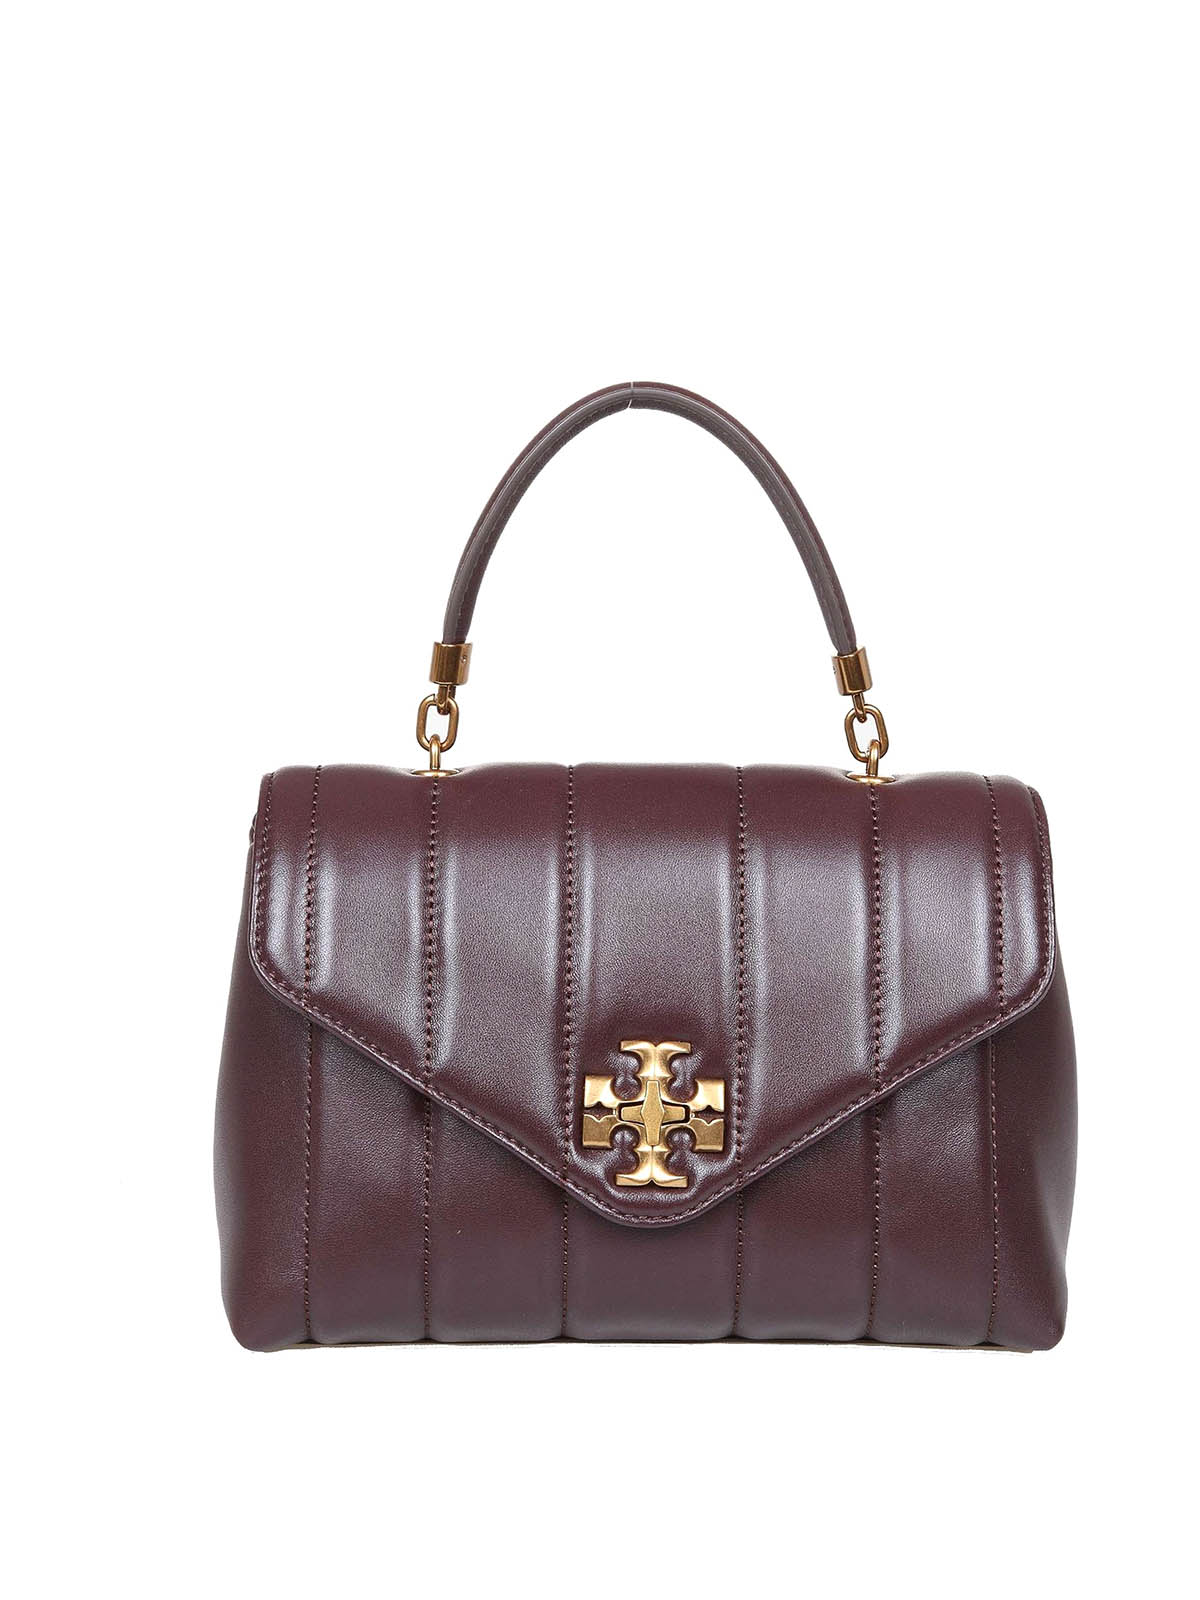 Laptop bags & briefcases Tory Burch - Small Kira bag - 83943616